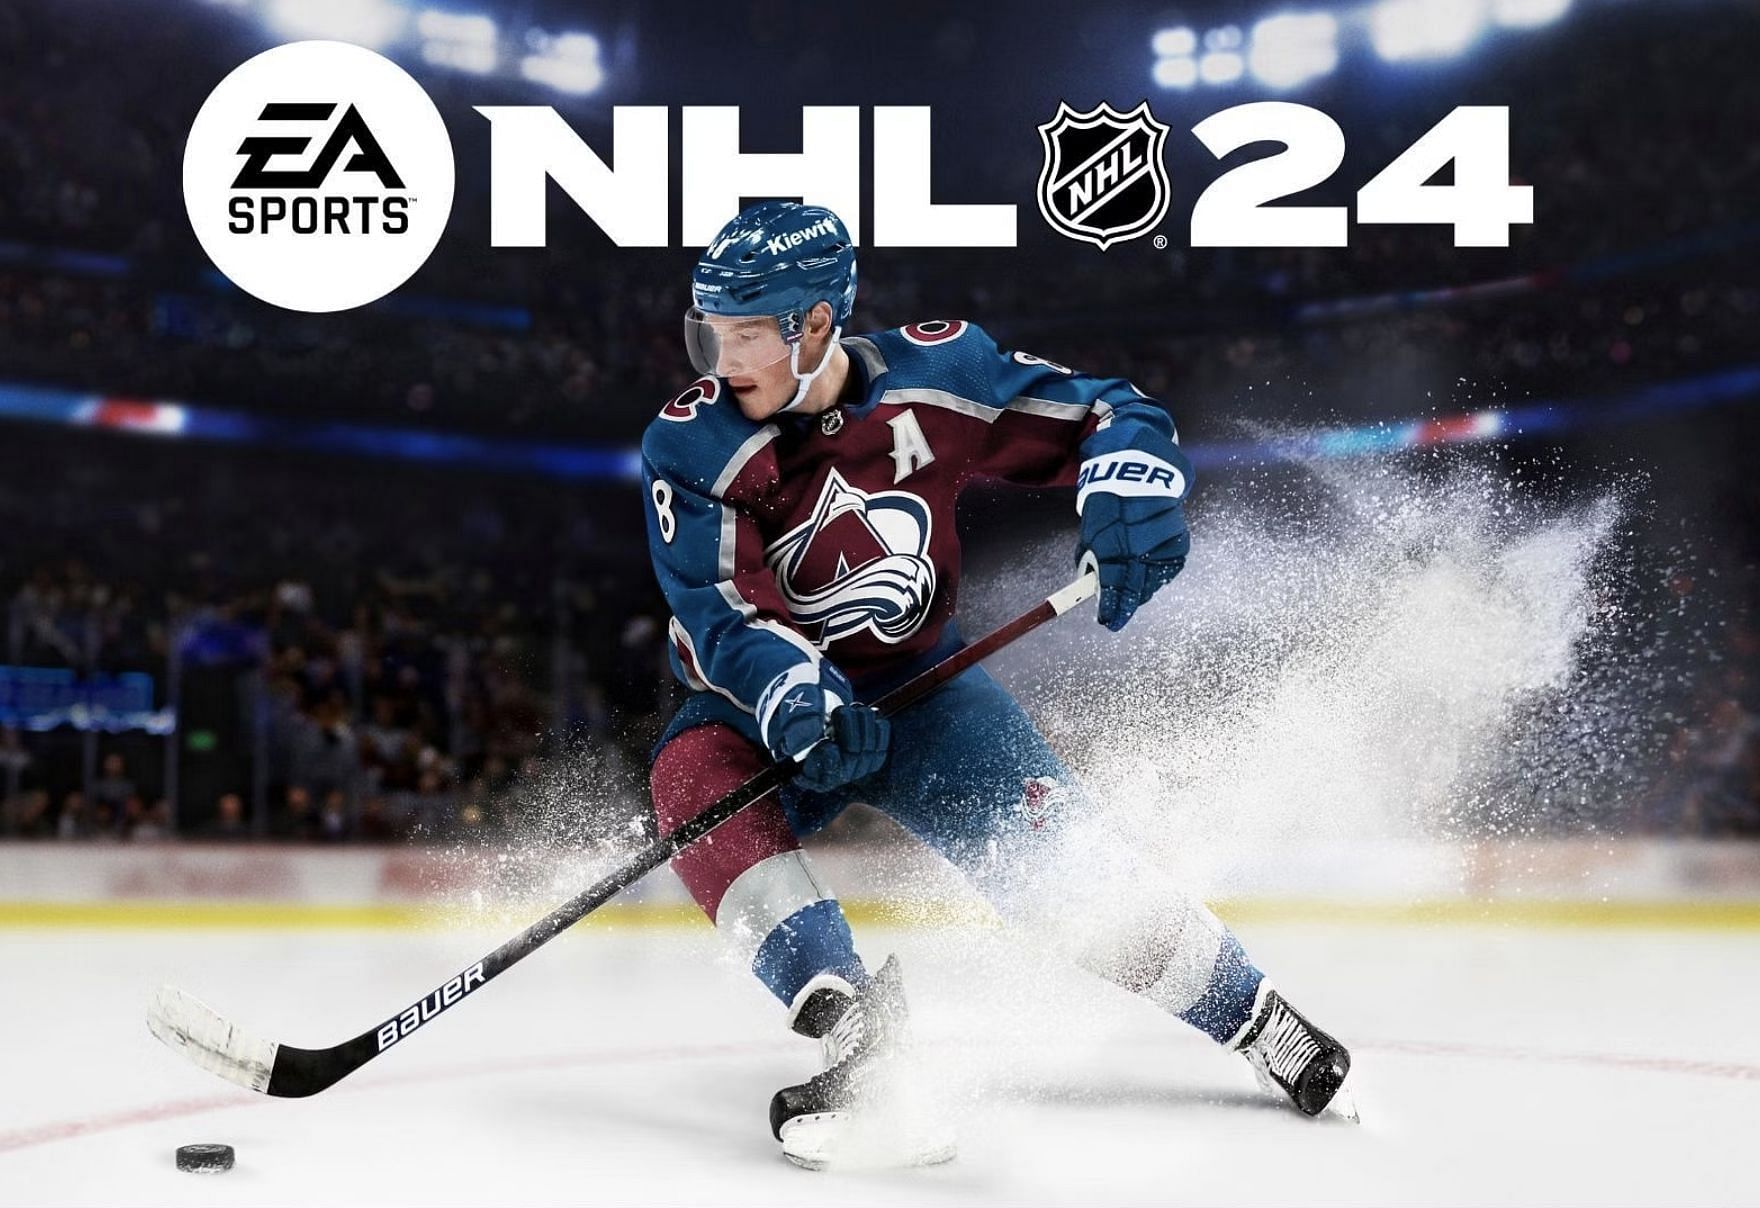 Has Cale Makar cursed Colorade Avalanche by becoming NHL 24 cover athelete?